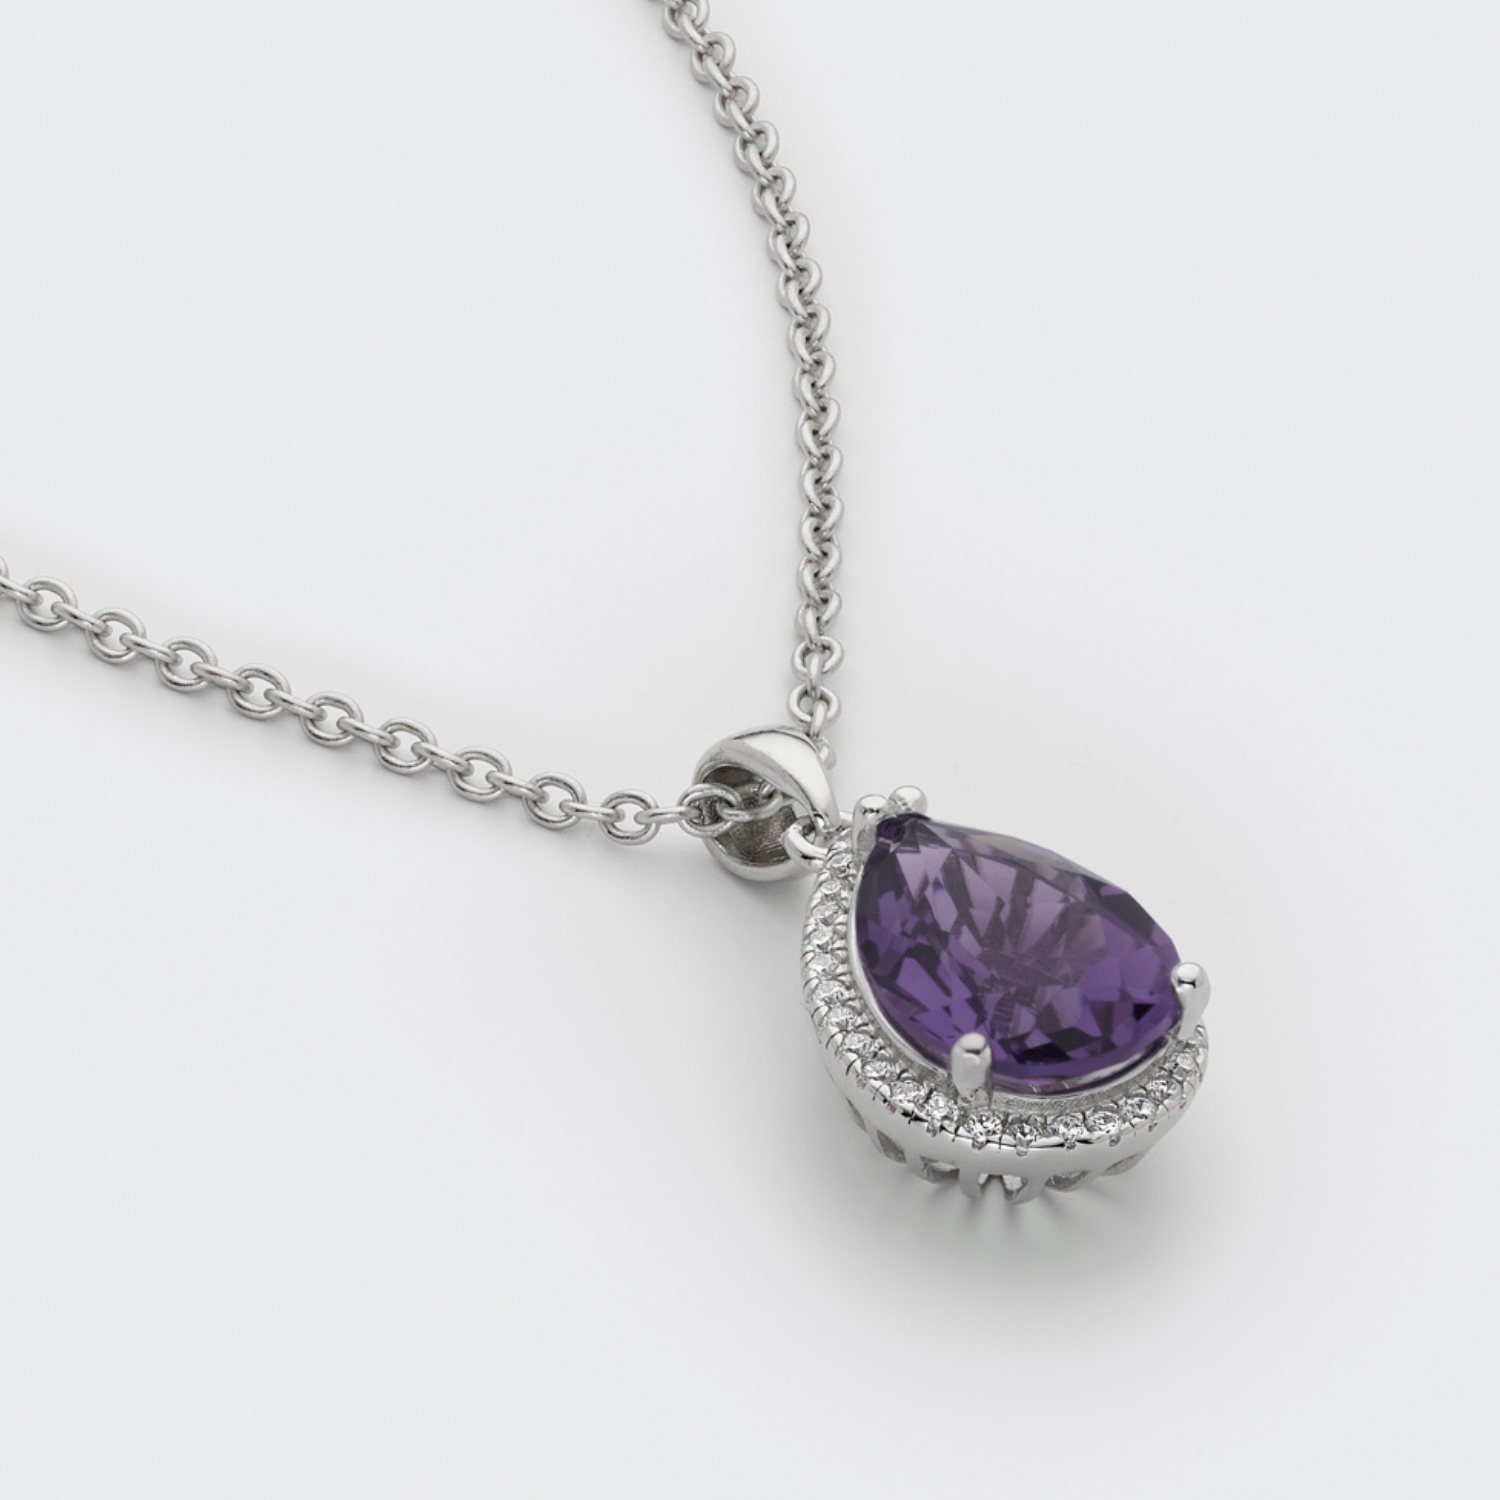 Luscious Amethyst Necklace